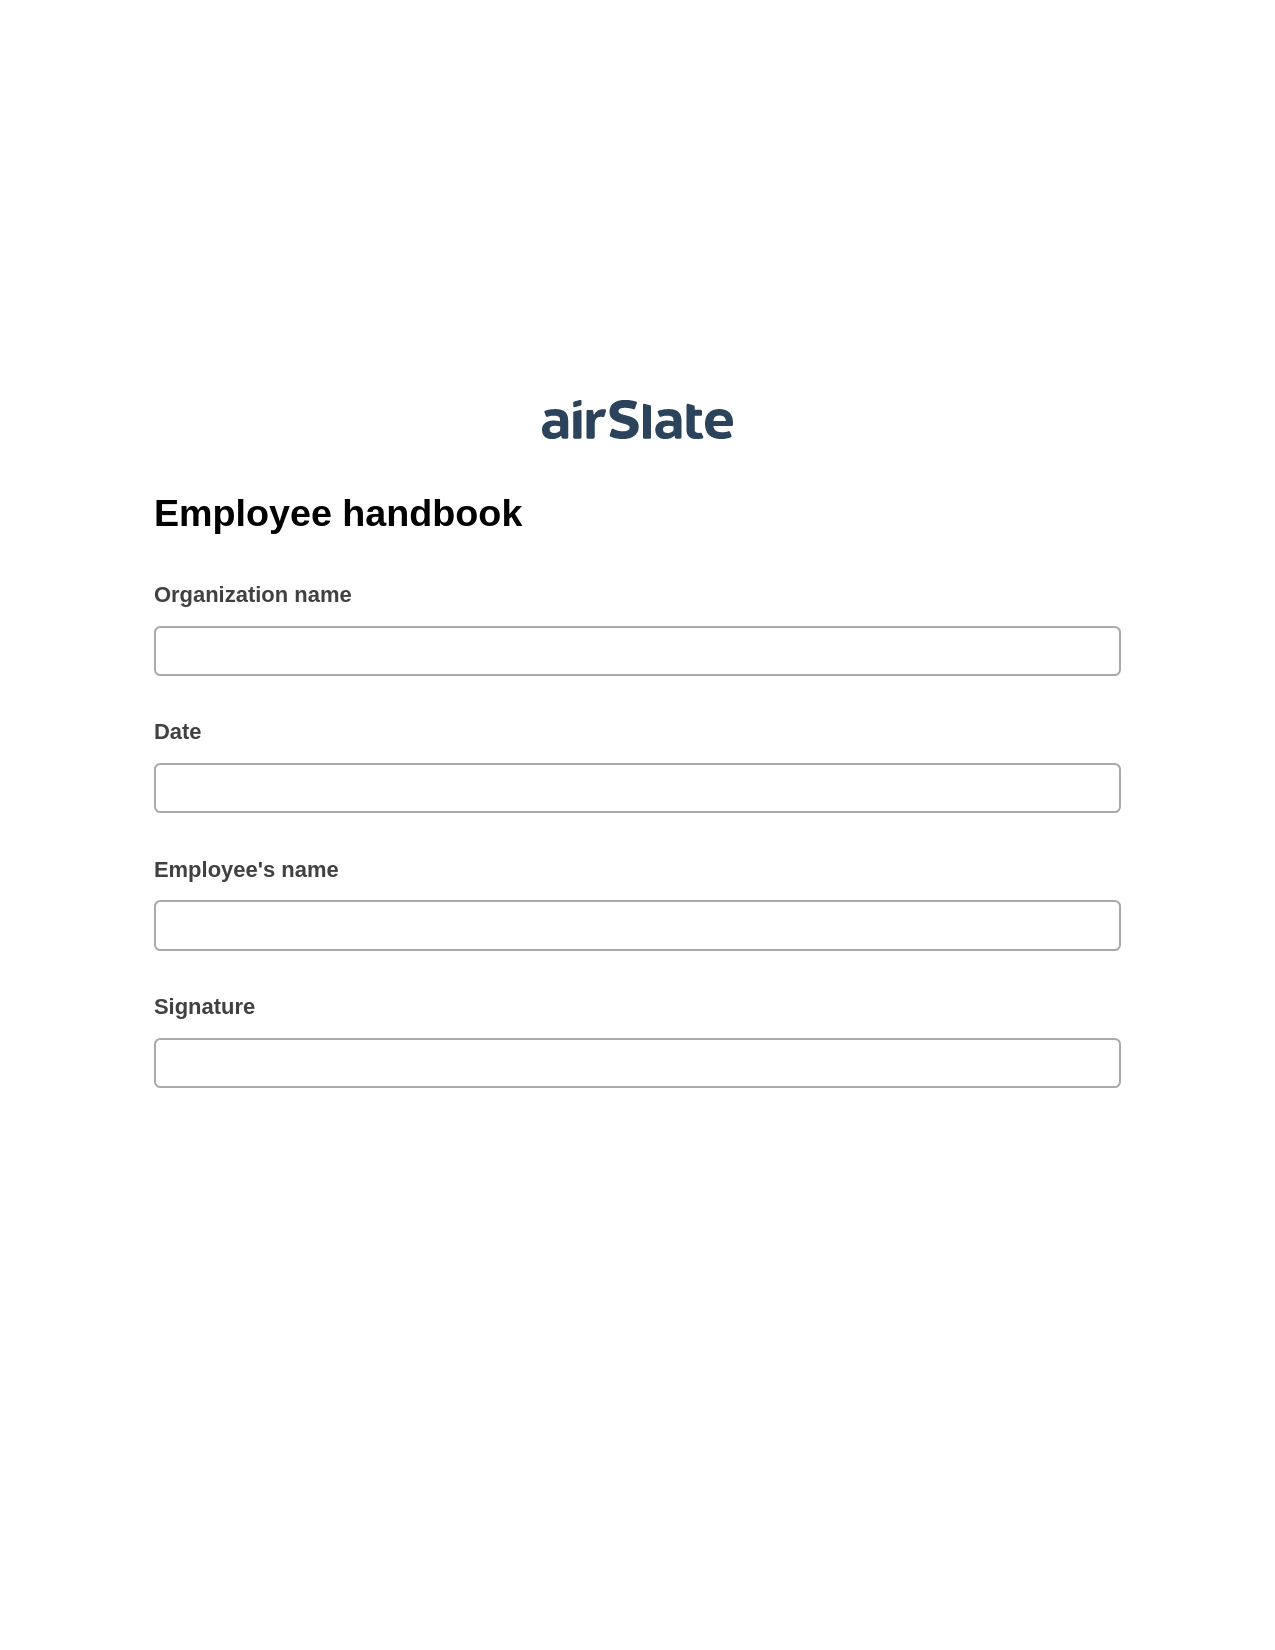 Employee handbook Pre-fill from NetSuite Records Bot, Send Mailchimp Campaign Bot, Box Bot